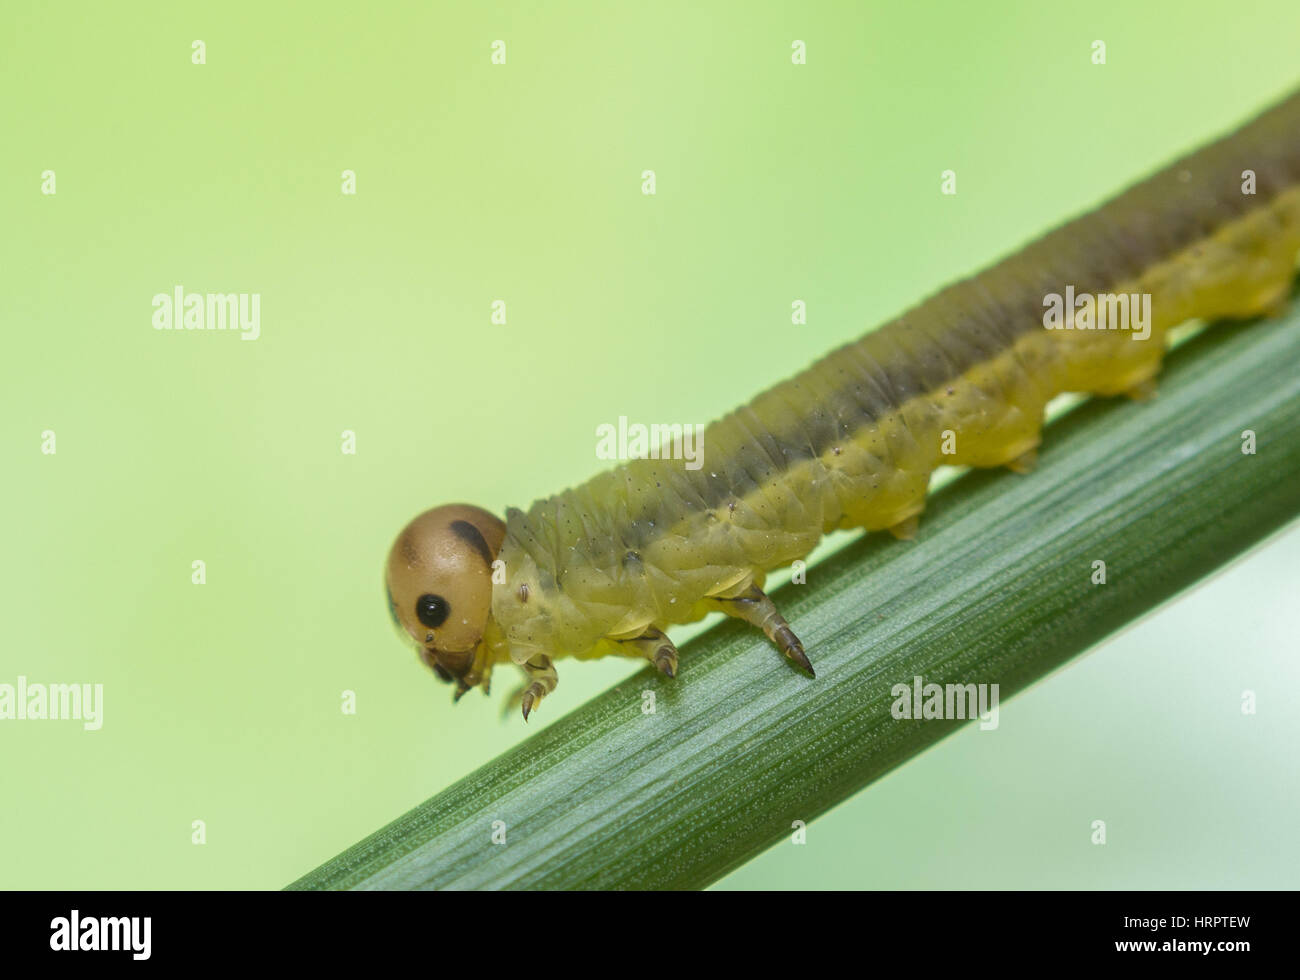 Close-up side view of a sawfly larvae on a stem Stock Photo